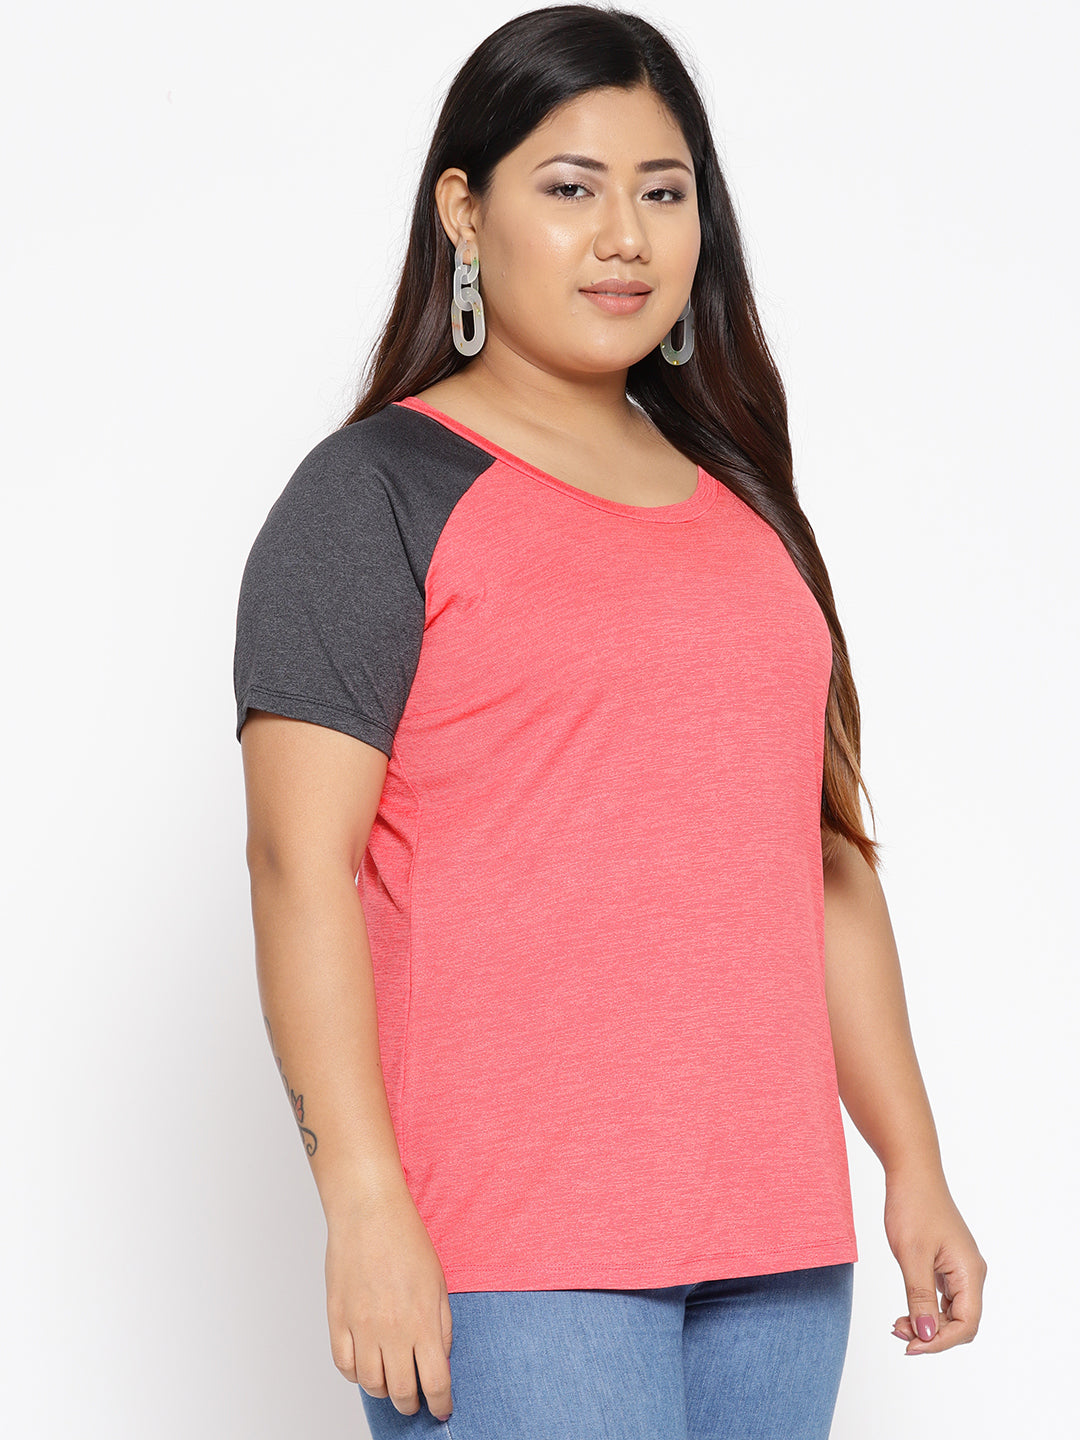 PINK AND GREY WORKOUT T SHIRT